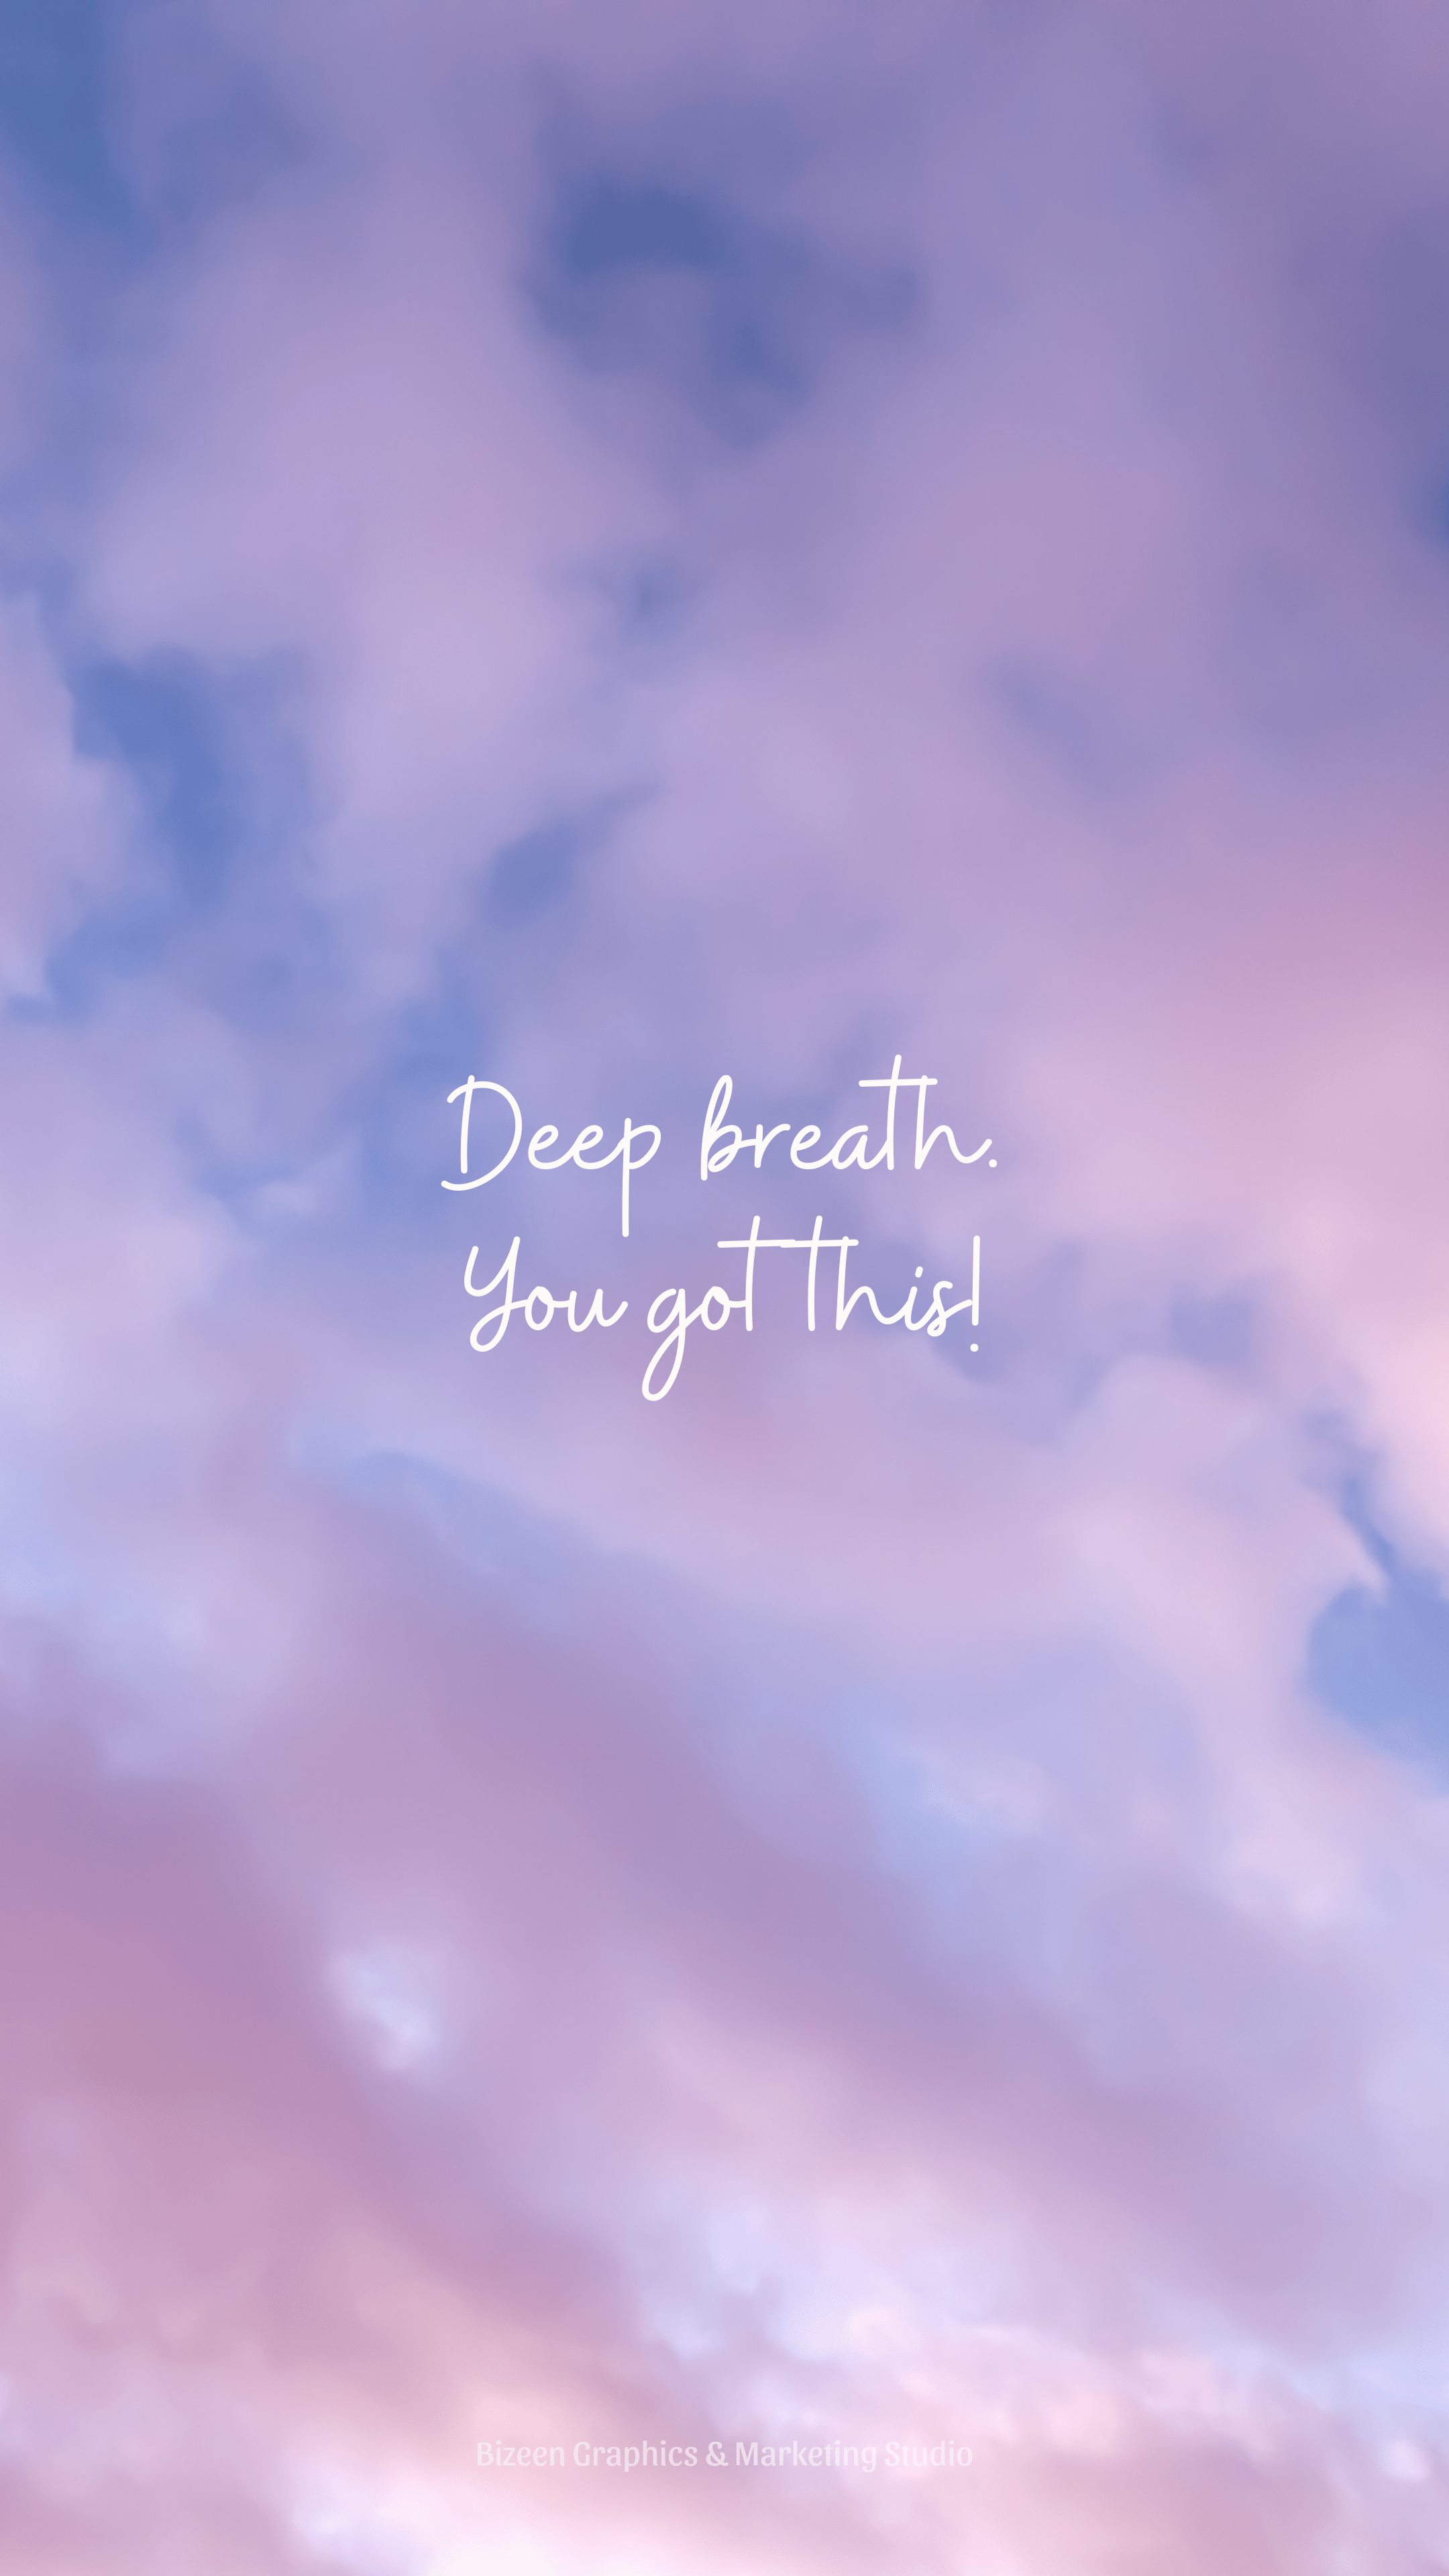 Aesthetic Wallpaper Quotes Motivational You got this!. iPhone wallpaper quotes inspirational, Inspirational quotes wallpaper, Positive quotes wallpaper